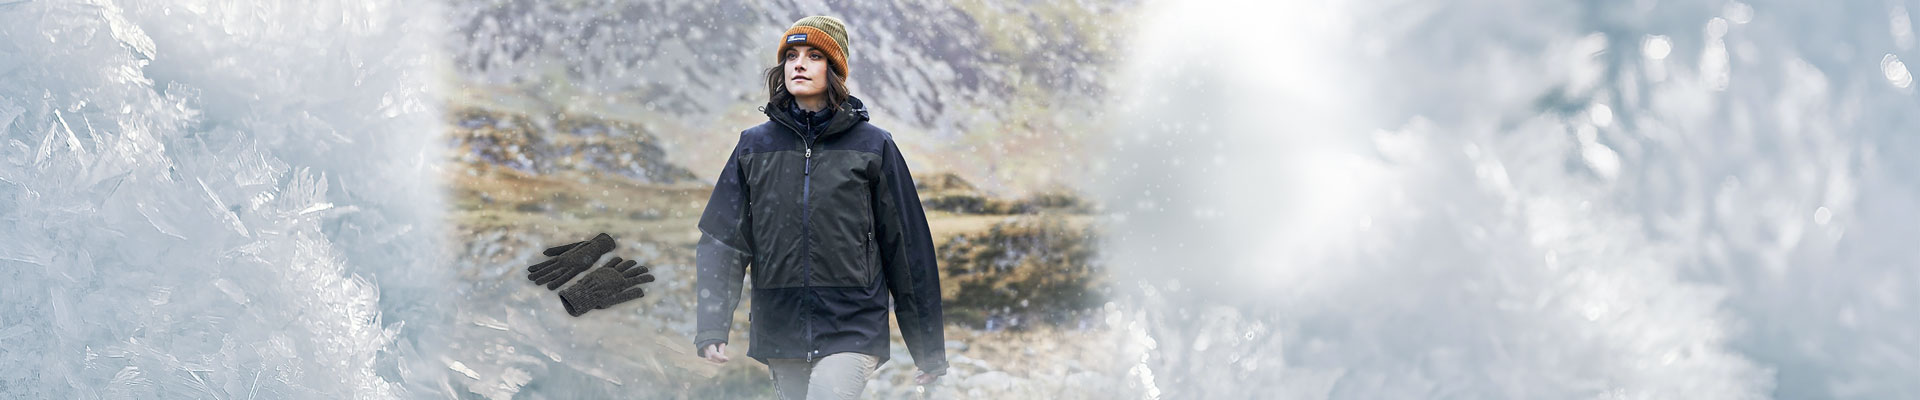 Warm clothing for cold days. Be prepared for all weathers!